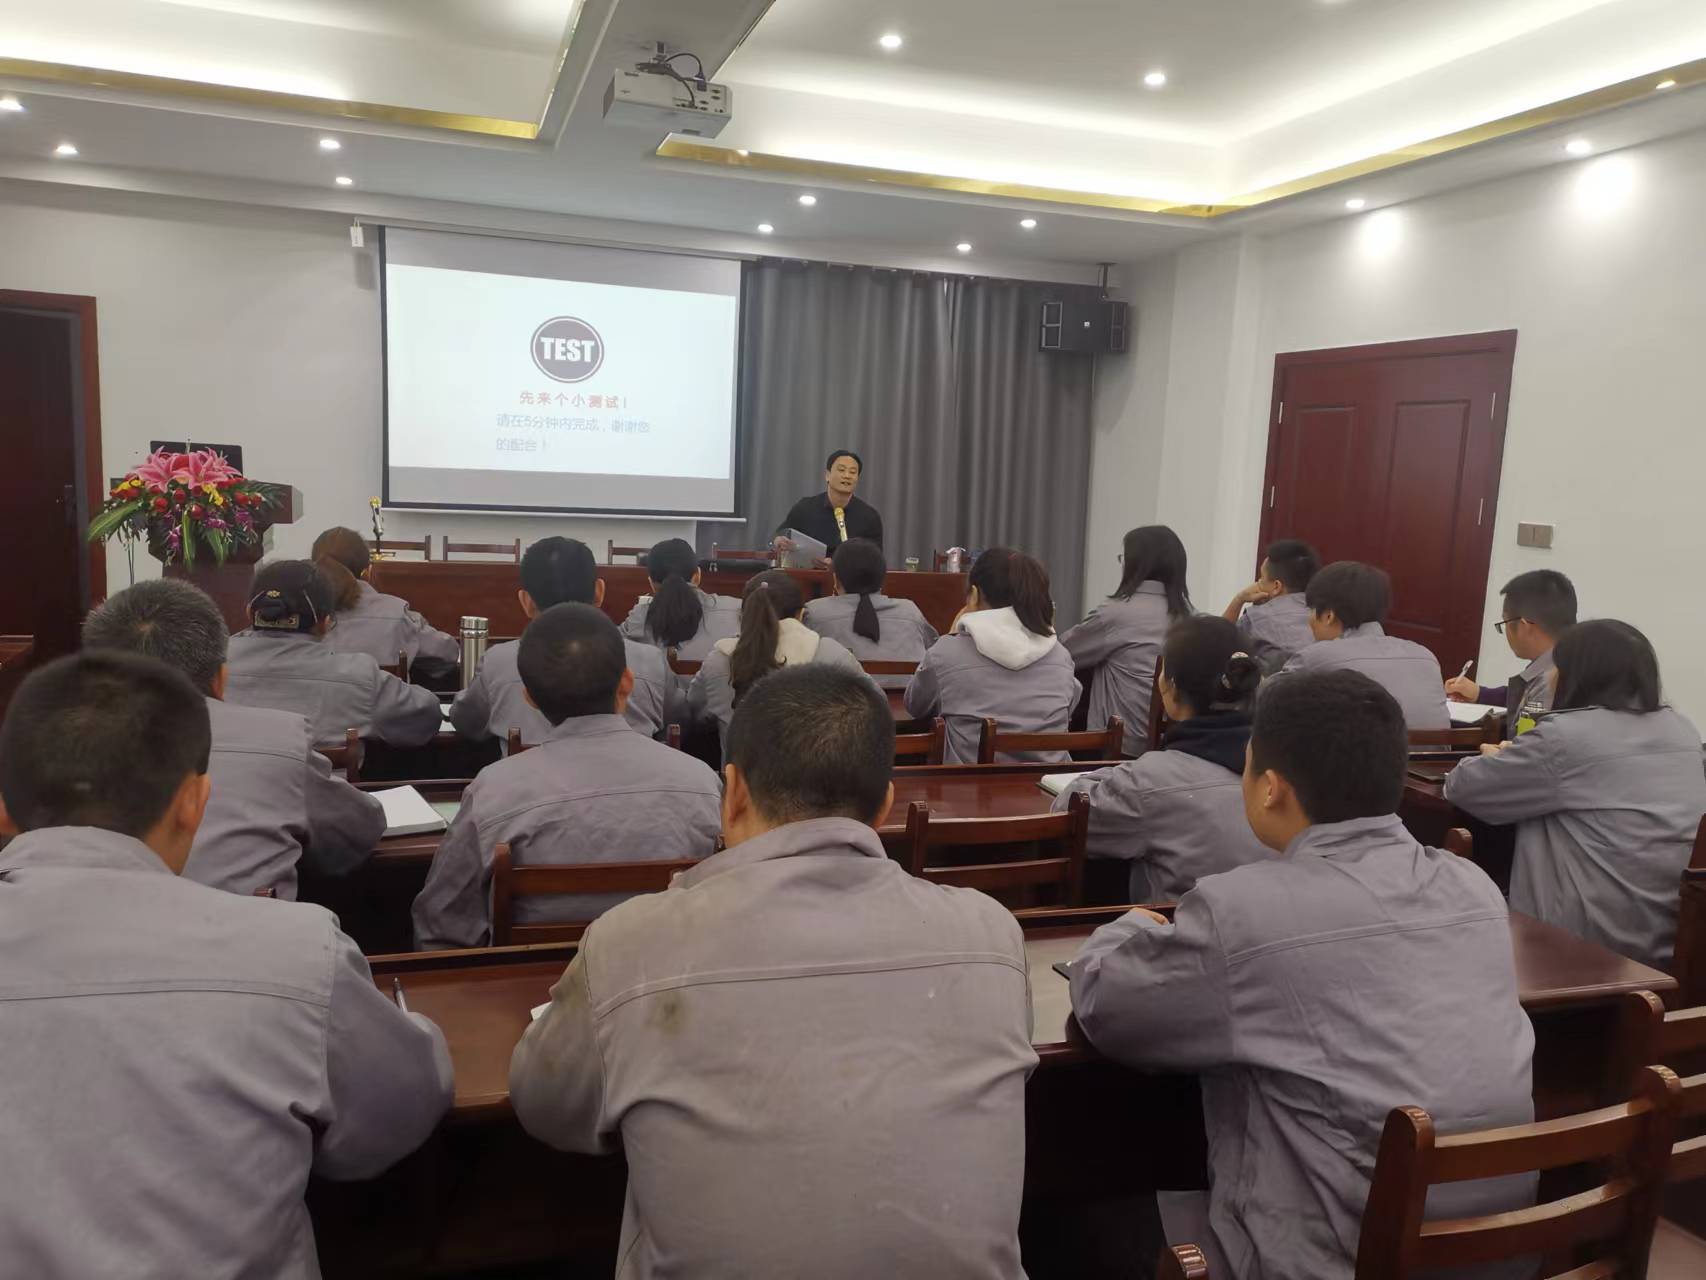 Joson held a training meeting on “electric porcelain technology for operators” in the second quarter of 2022